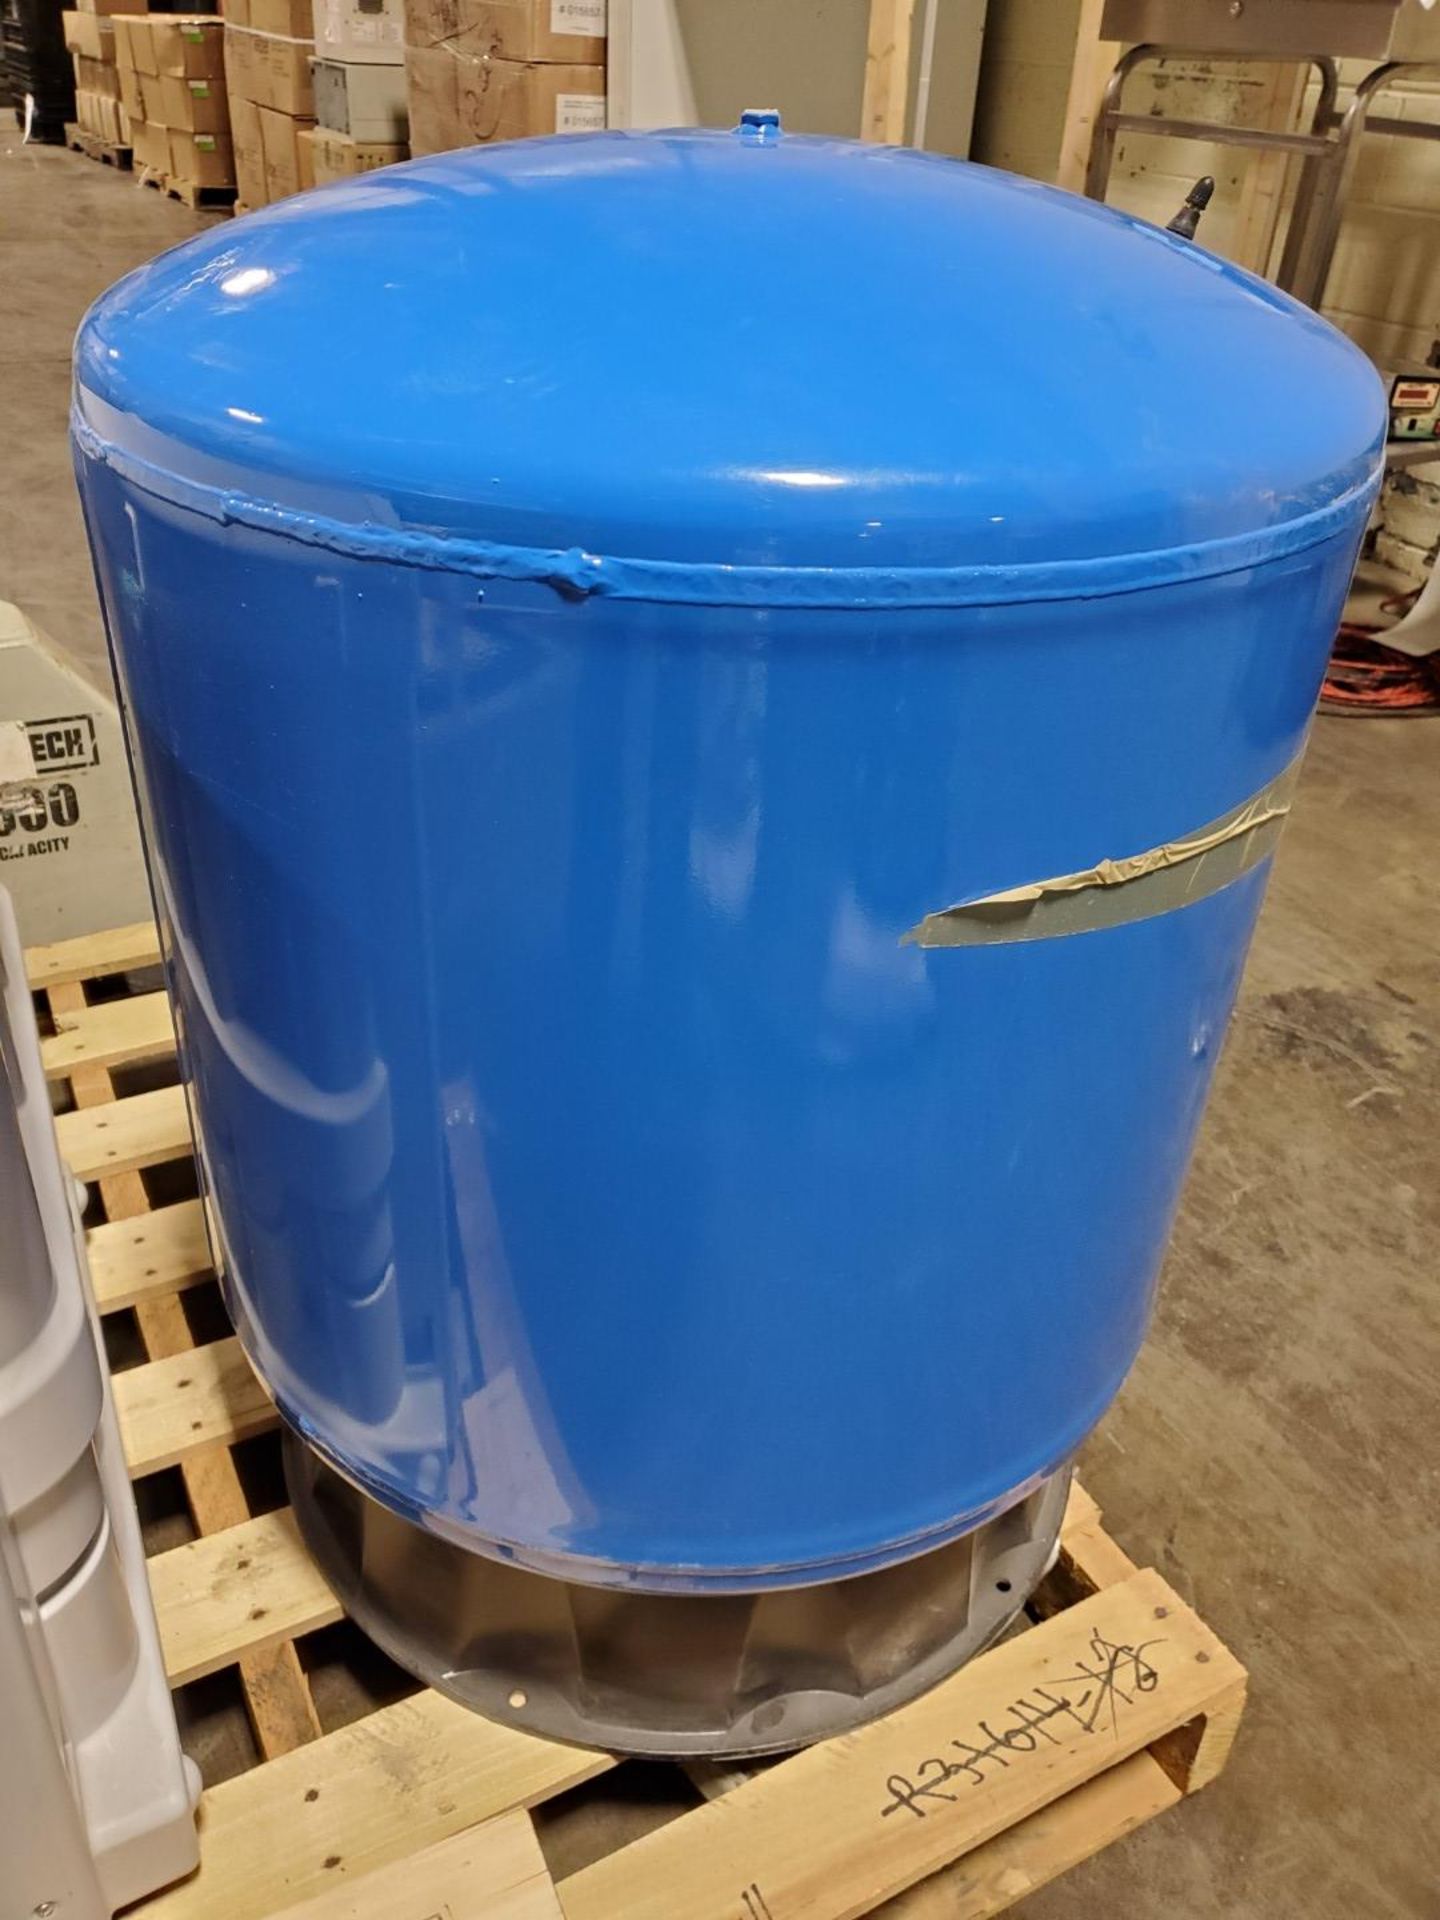 Pentair 50 Gallon Compressed Air tank, Model PS50-01, C/S - Image 4 of 4